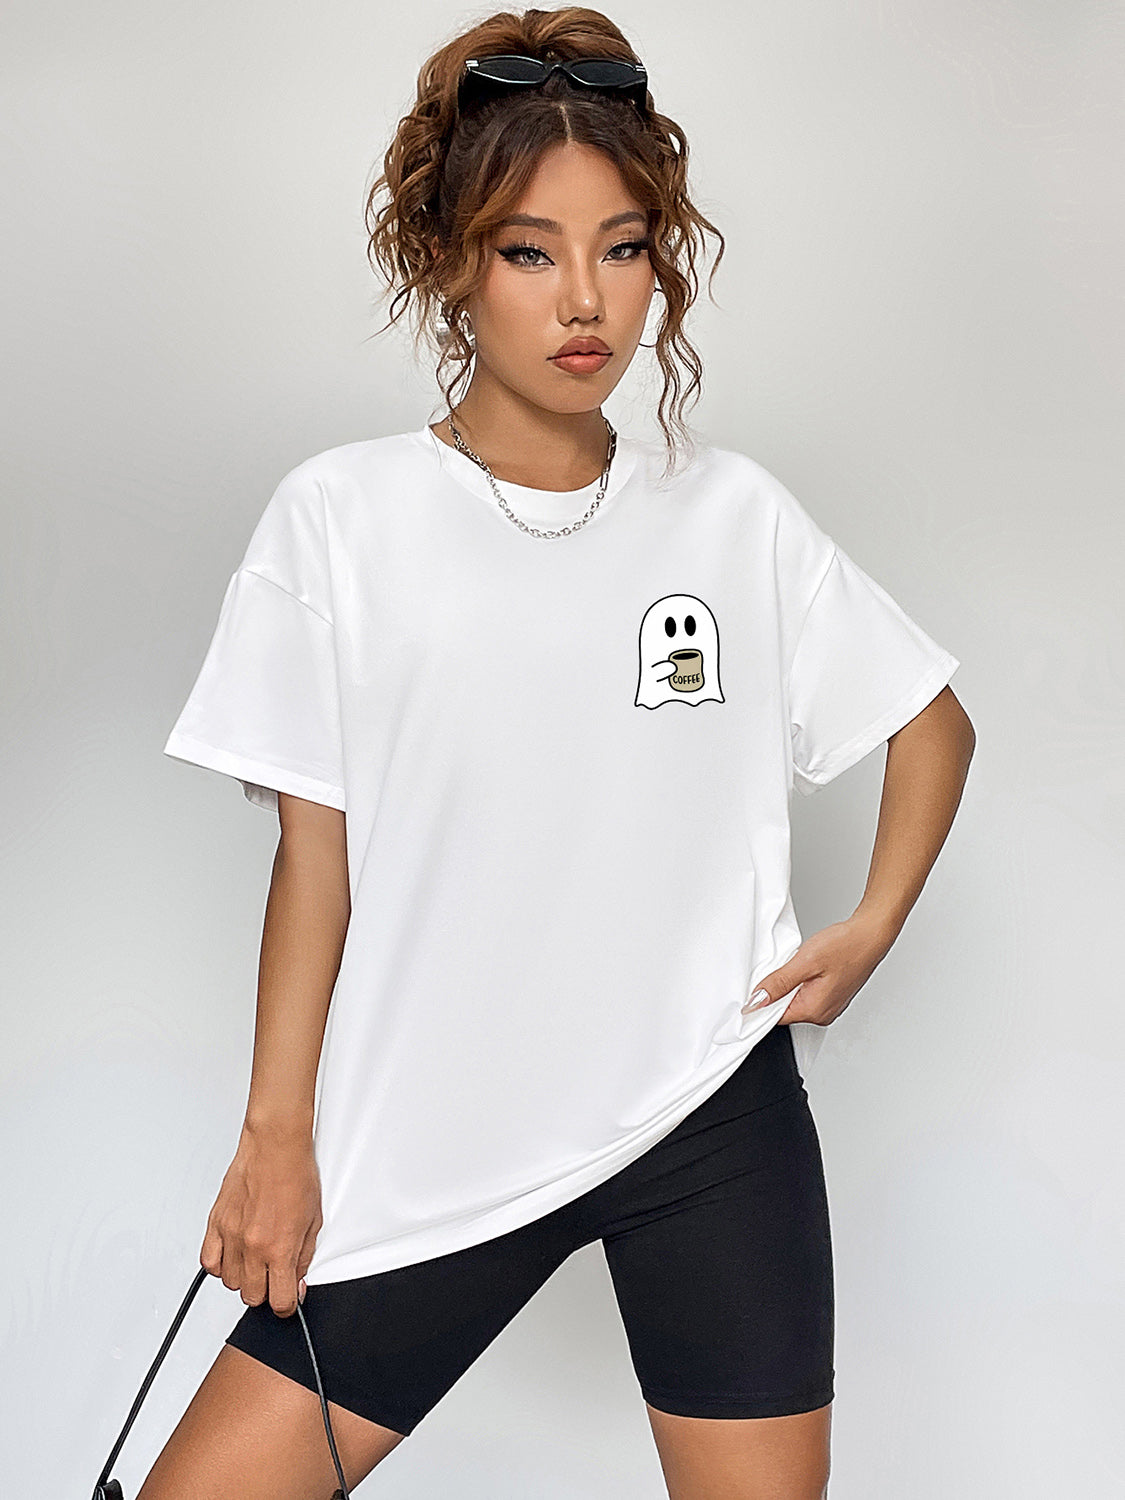 Round Neck Short Sleeve Ghost Graphic T-Shirt king-general-store-5710.myshopify.com